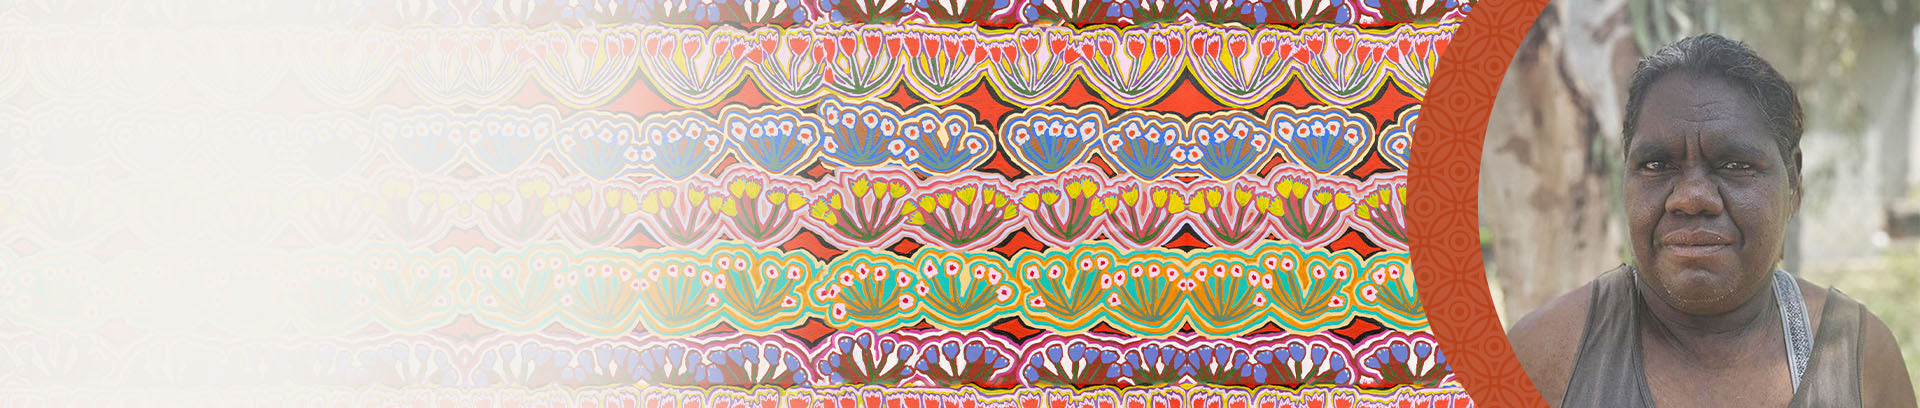 Gladys Lewis Designs Featuring Aboriginal Art Gifts And Lifestyle Products